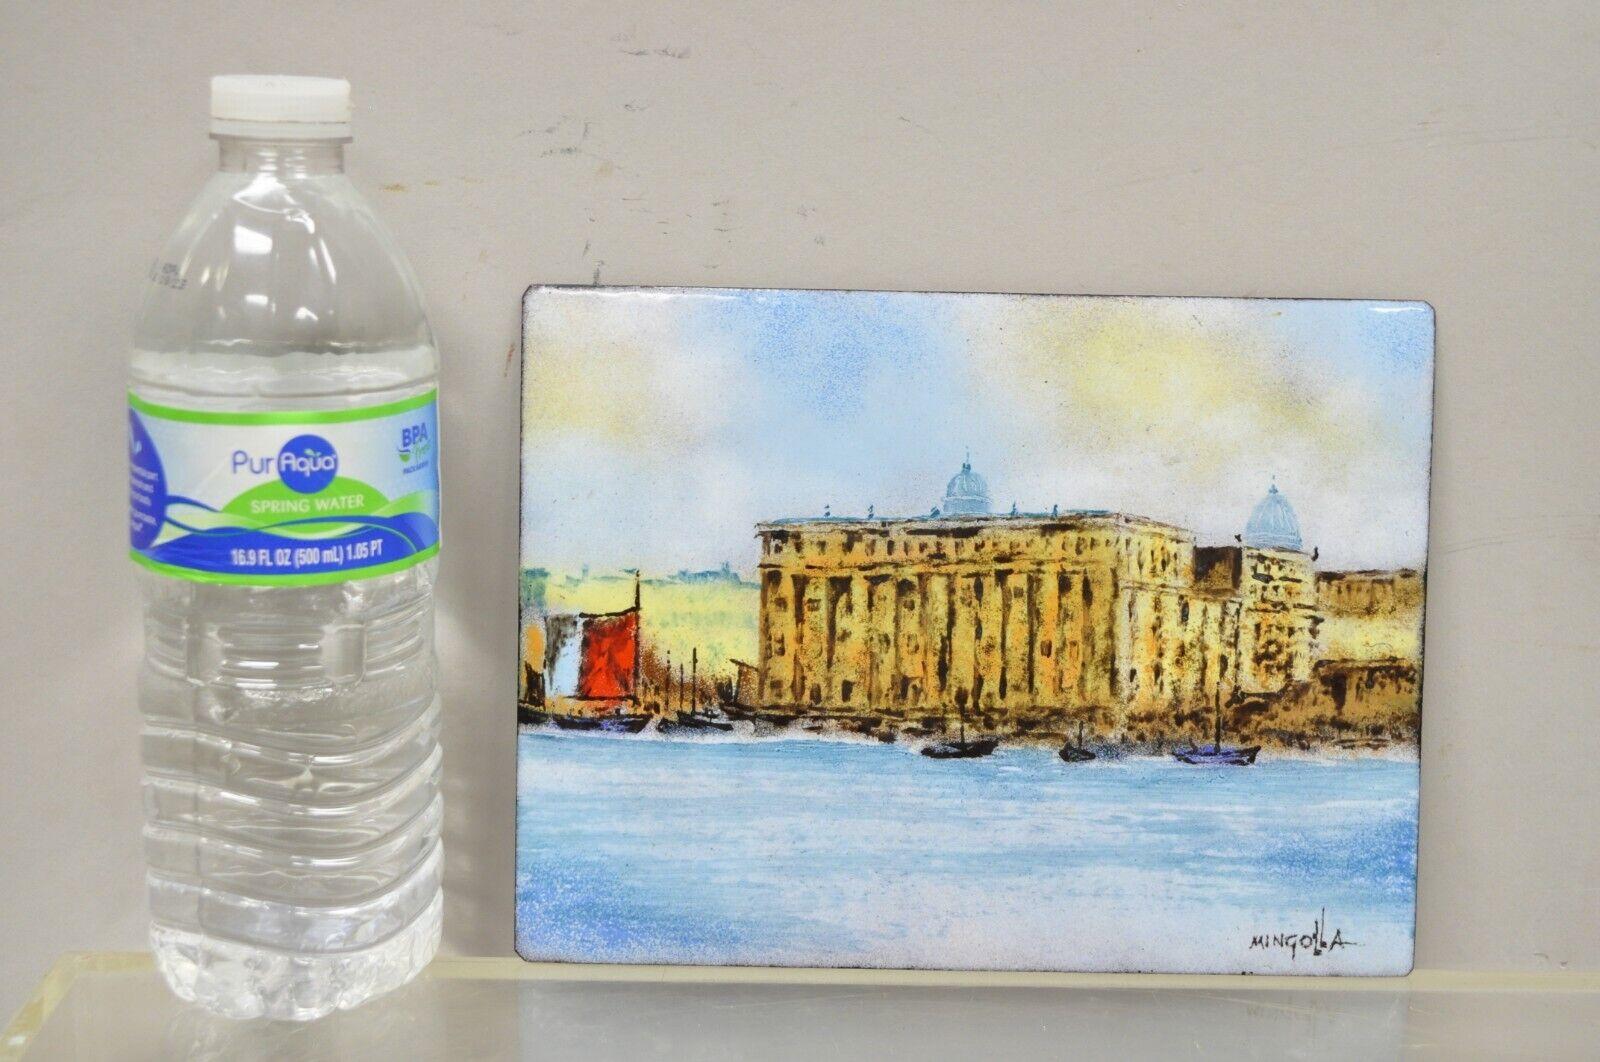 Dom Dominic Mingolla Enamel on Copper Small Painting Malta Mediterranean Sea 6 x 8. Item features enamel on copper painting, artist signature to bottom right corner, beautiful subject and color, unframed. Circa late 20th century. Measurements: 6